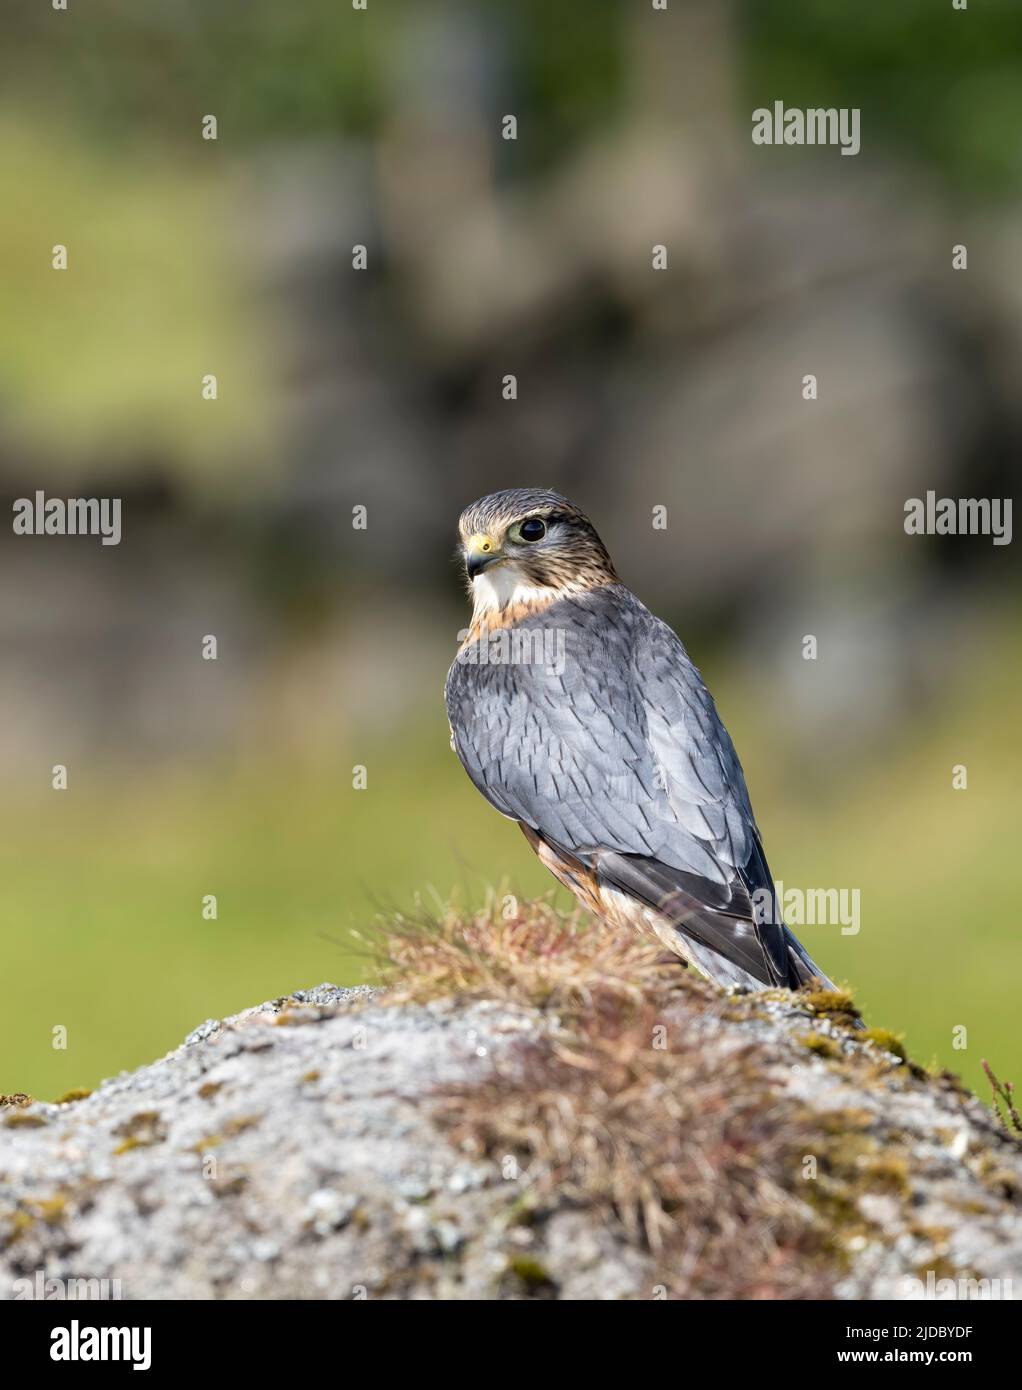 A watchful, Merlin, (Falco columbarius), one of the UKs smaller birds of prey, stands on rock amongst heather covered moorland Stock Photo